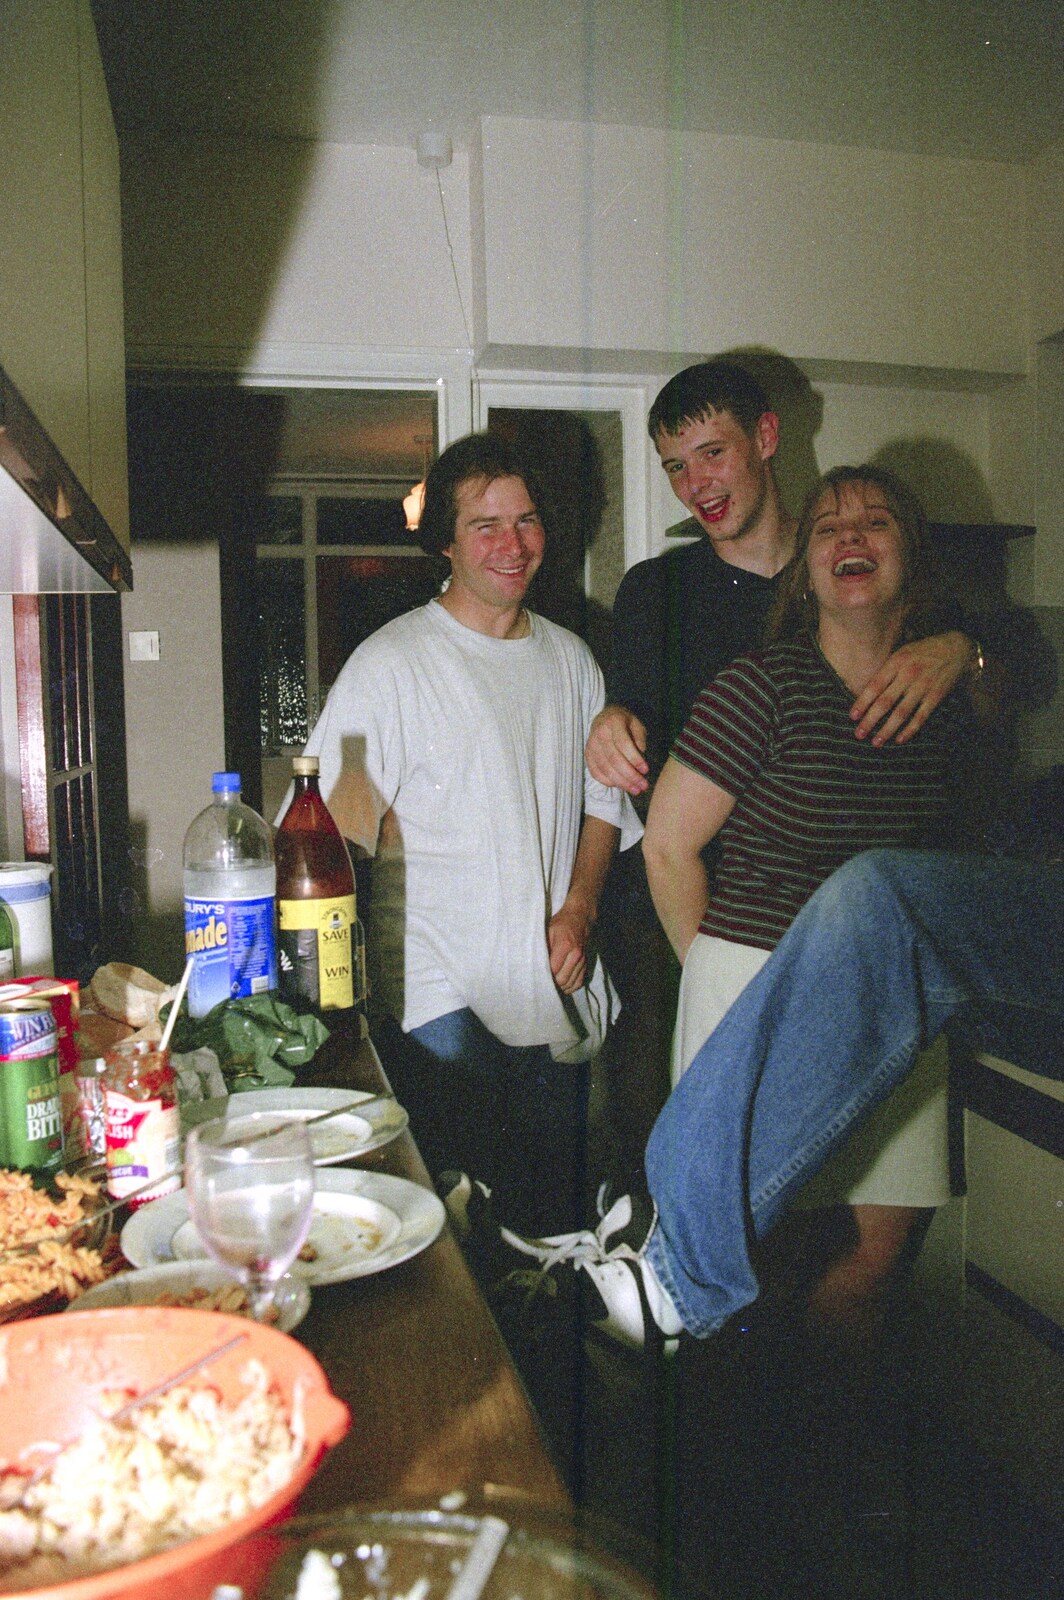 Russell and the gang in Andrew's kitchen from Andrew's CISU Party, and Nosher's Garden Barbeque, Ipswich and Brome, Suffolk - June 10th 1998